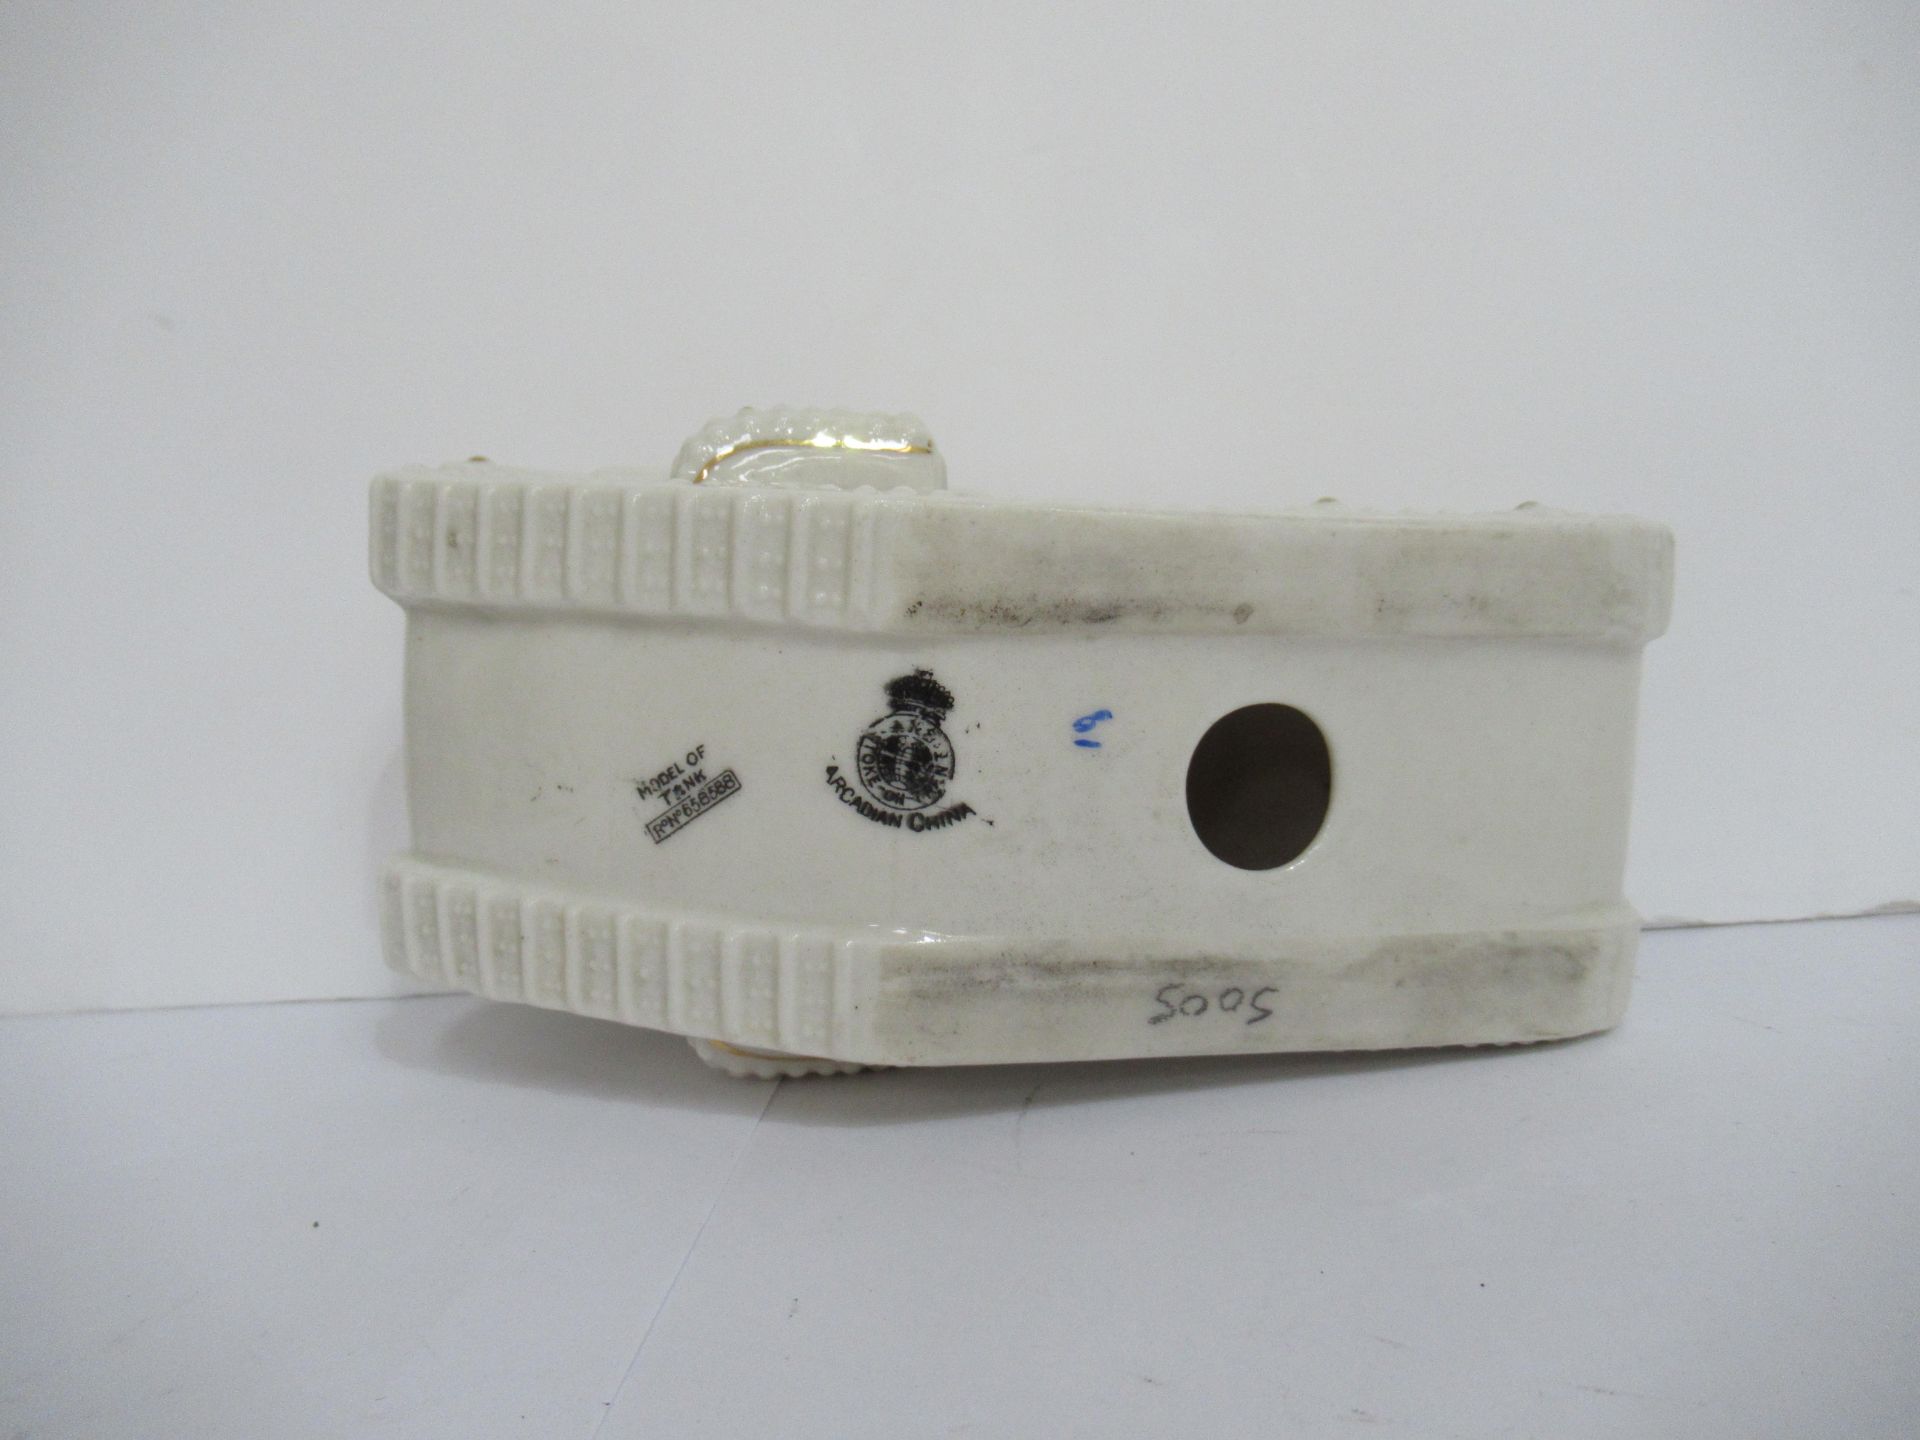 Crested China Arcadian model of tank with Grimsby coat of arms (90mm x 115mm) - Image 7 of 18